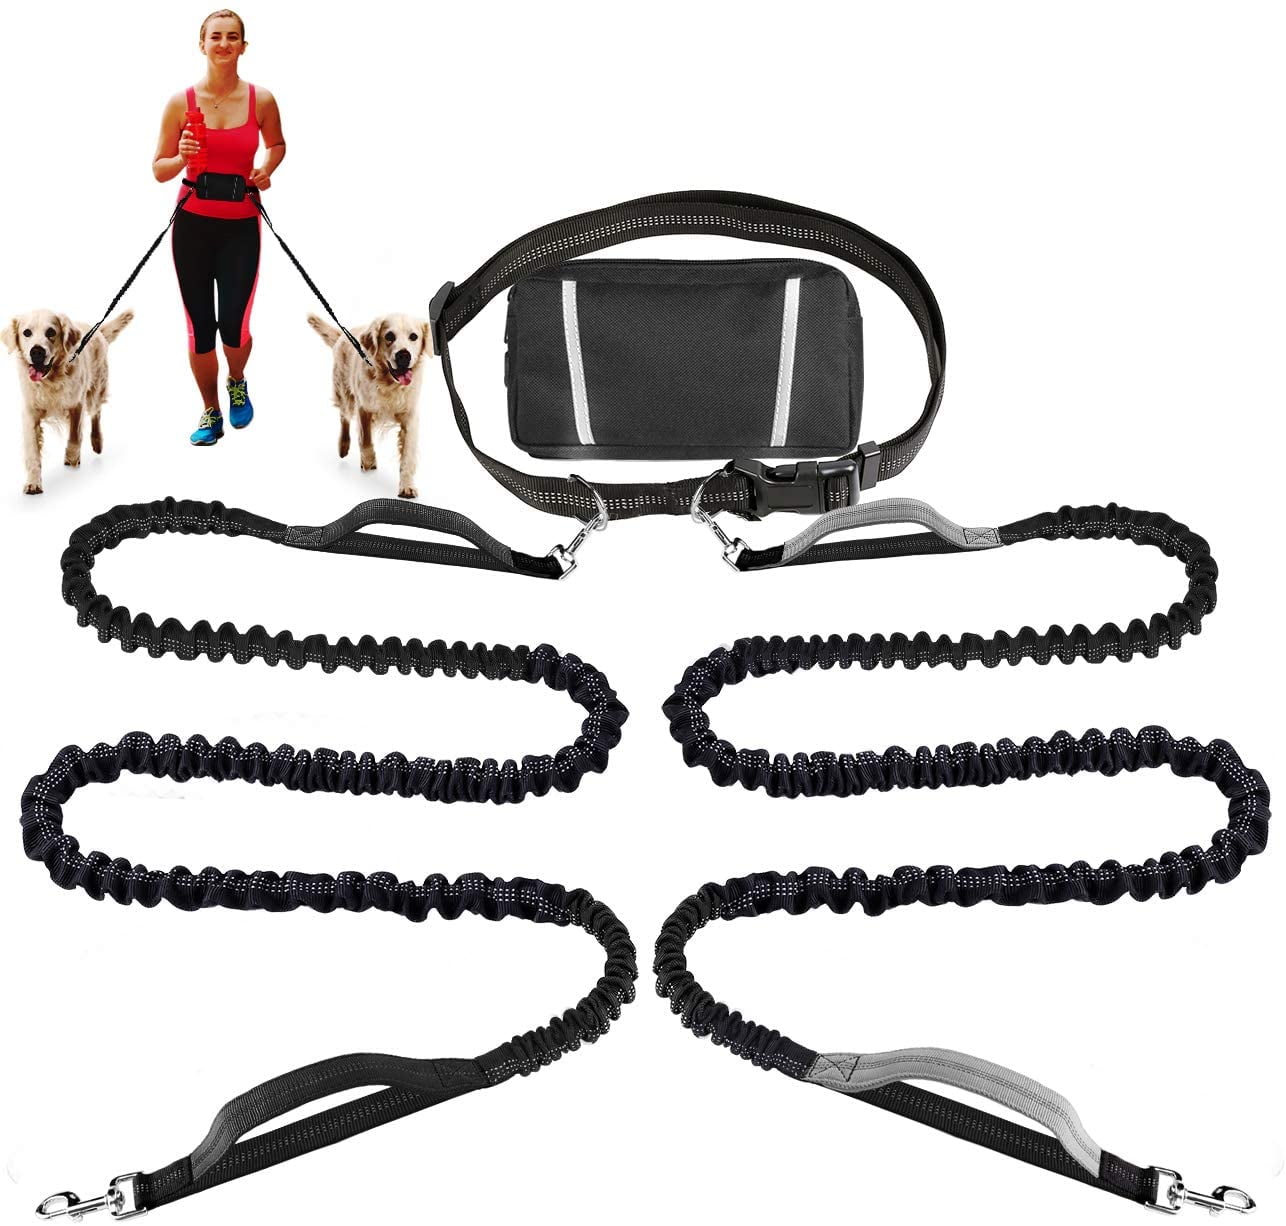 Hands Free Dog Leash Retractable Bungee Dog Running Waist Pouch Leash for Running with Poop Bag Holder,Dog Neck Protector for Small Medium Large Dog 